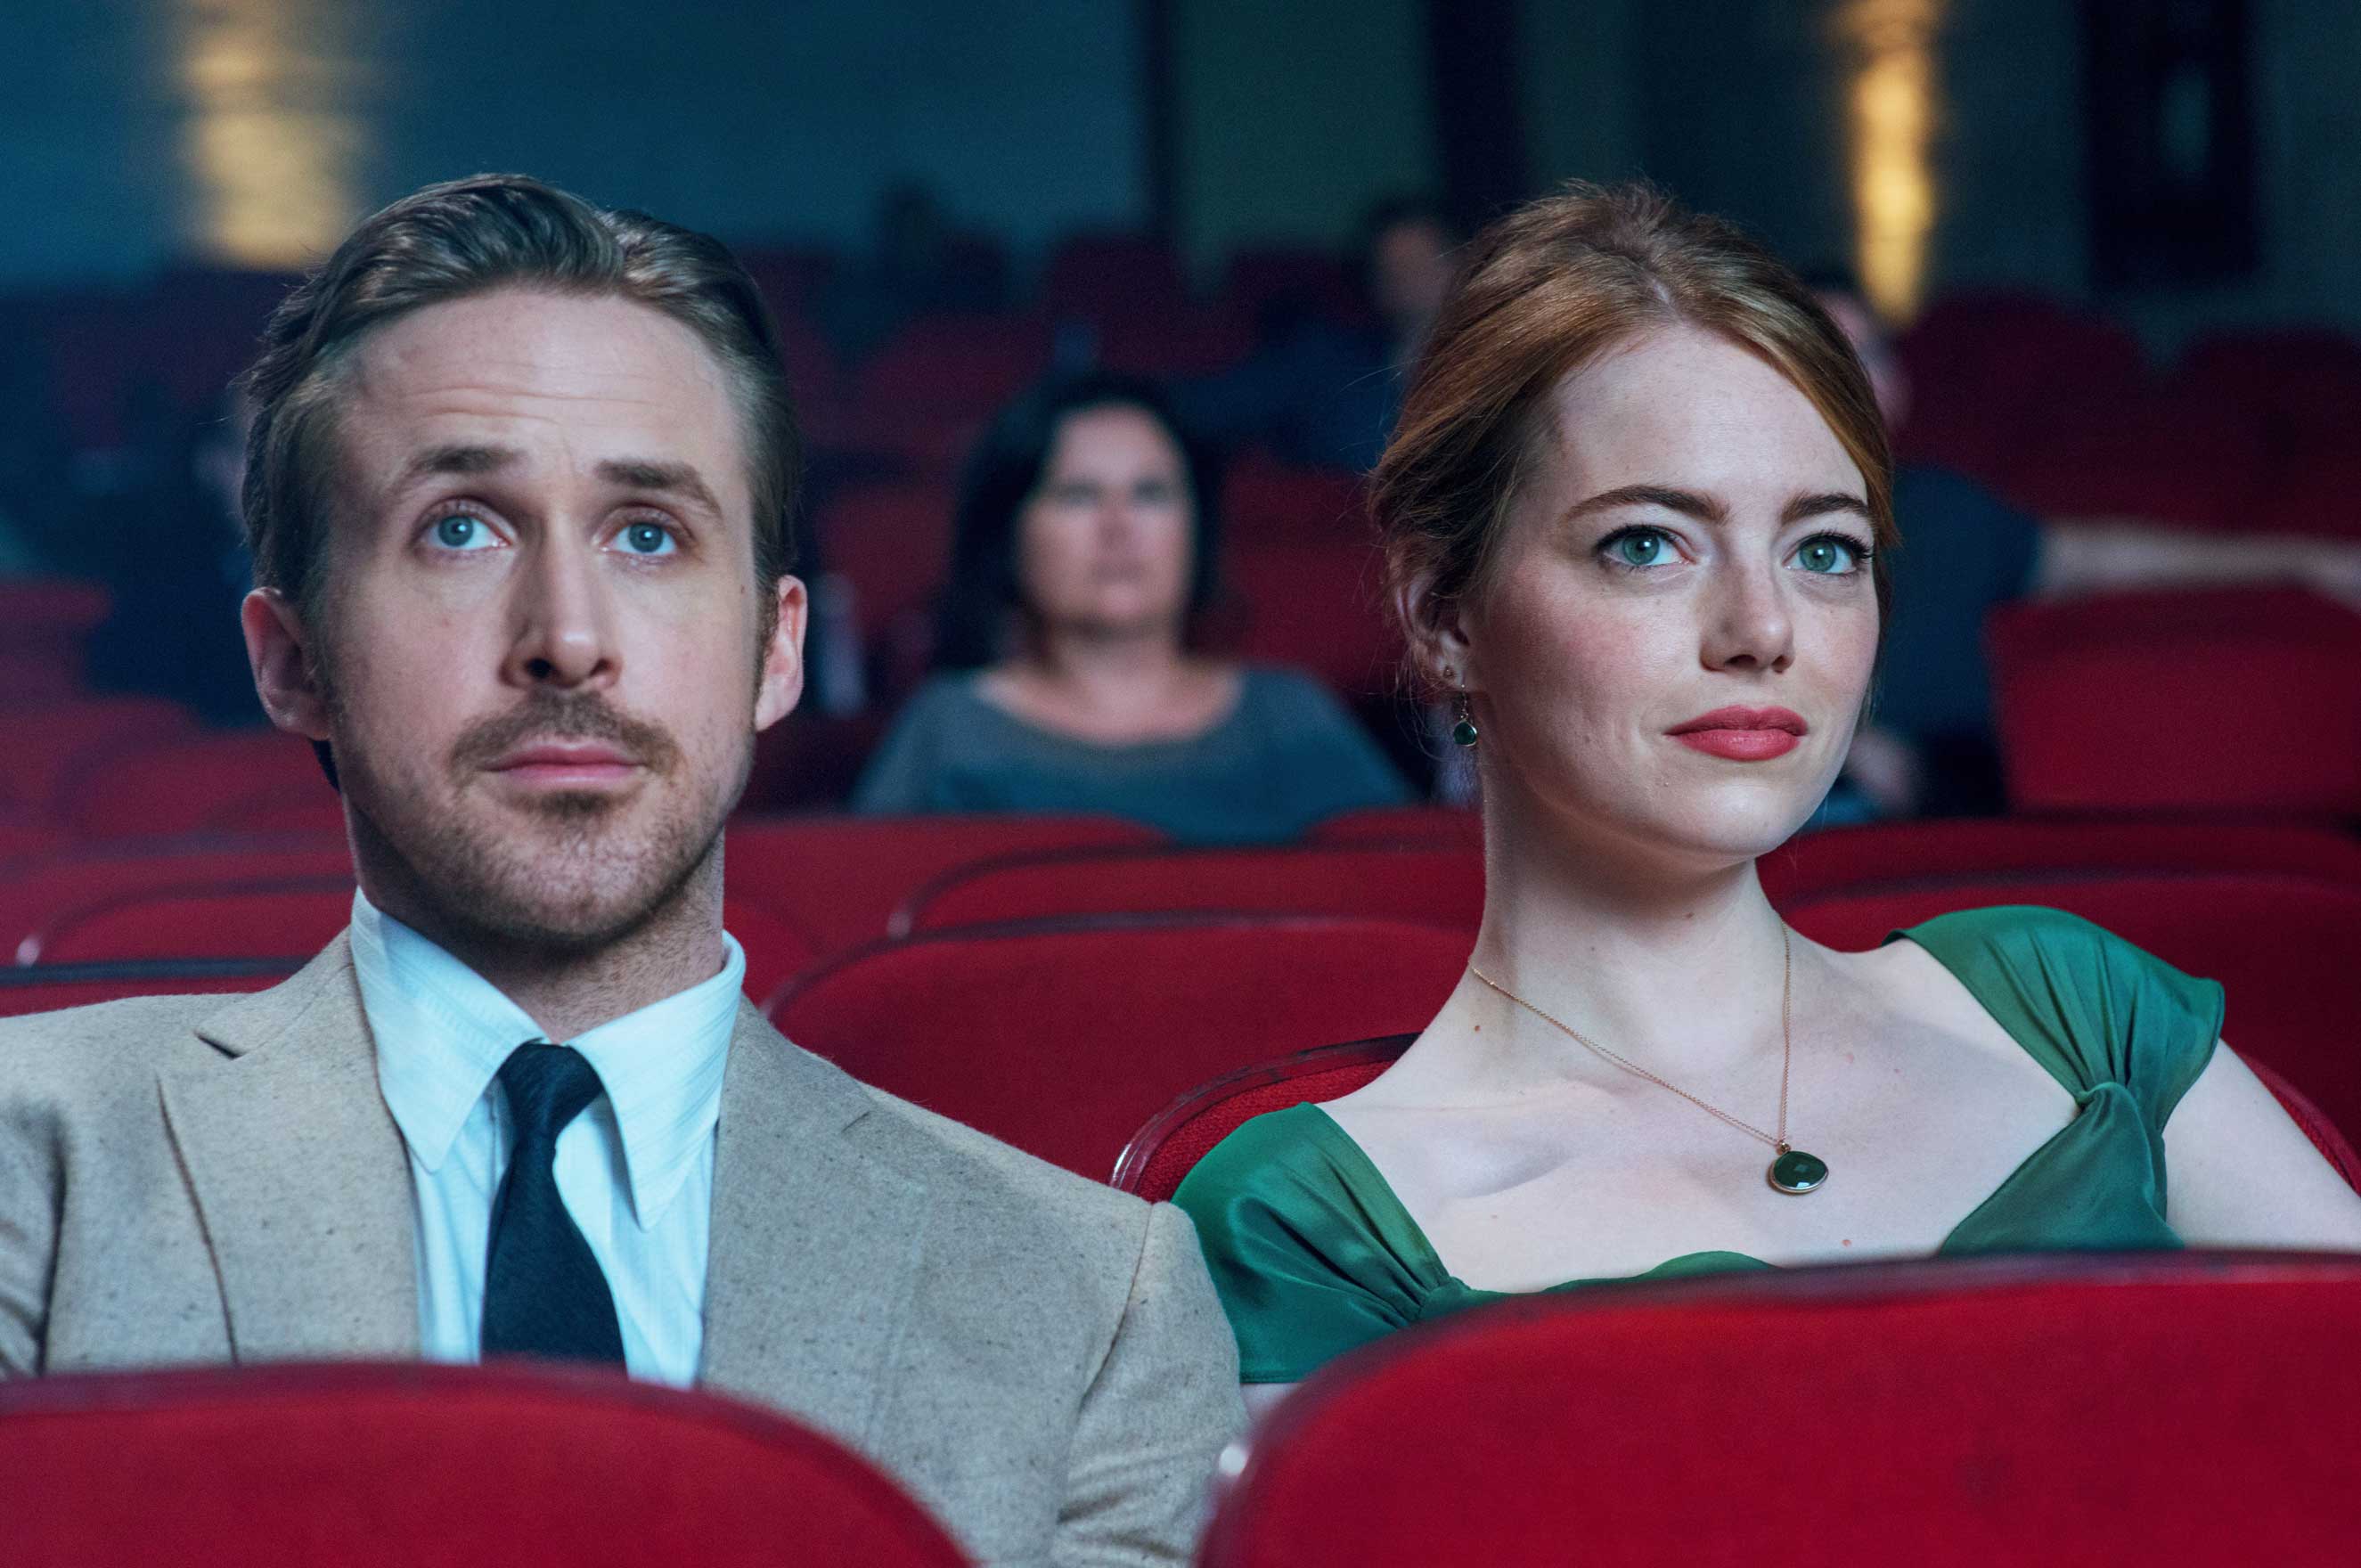 Playing striving artists, Gosling and Stone manage to make La La Land’s musical numbers seem natural (Dale Robinette—Lionsgate)